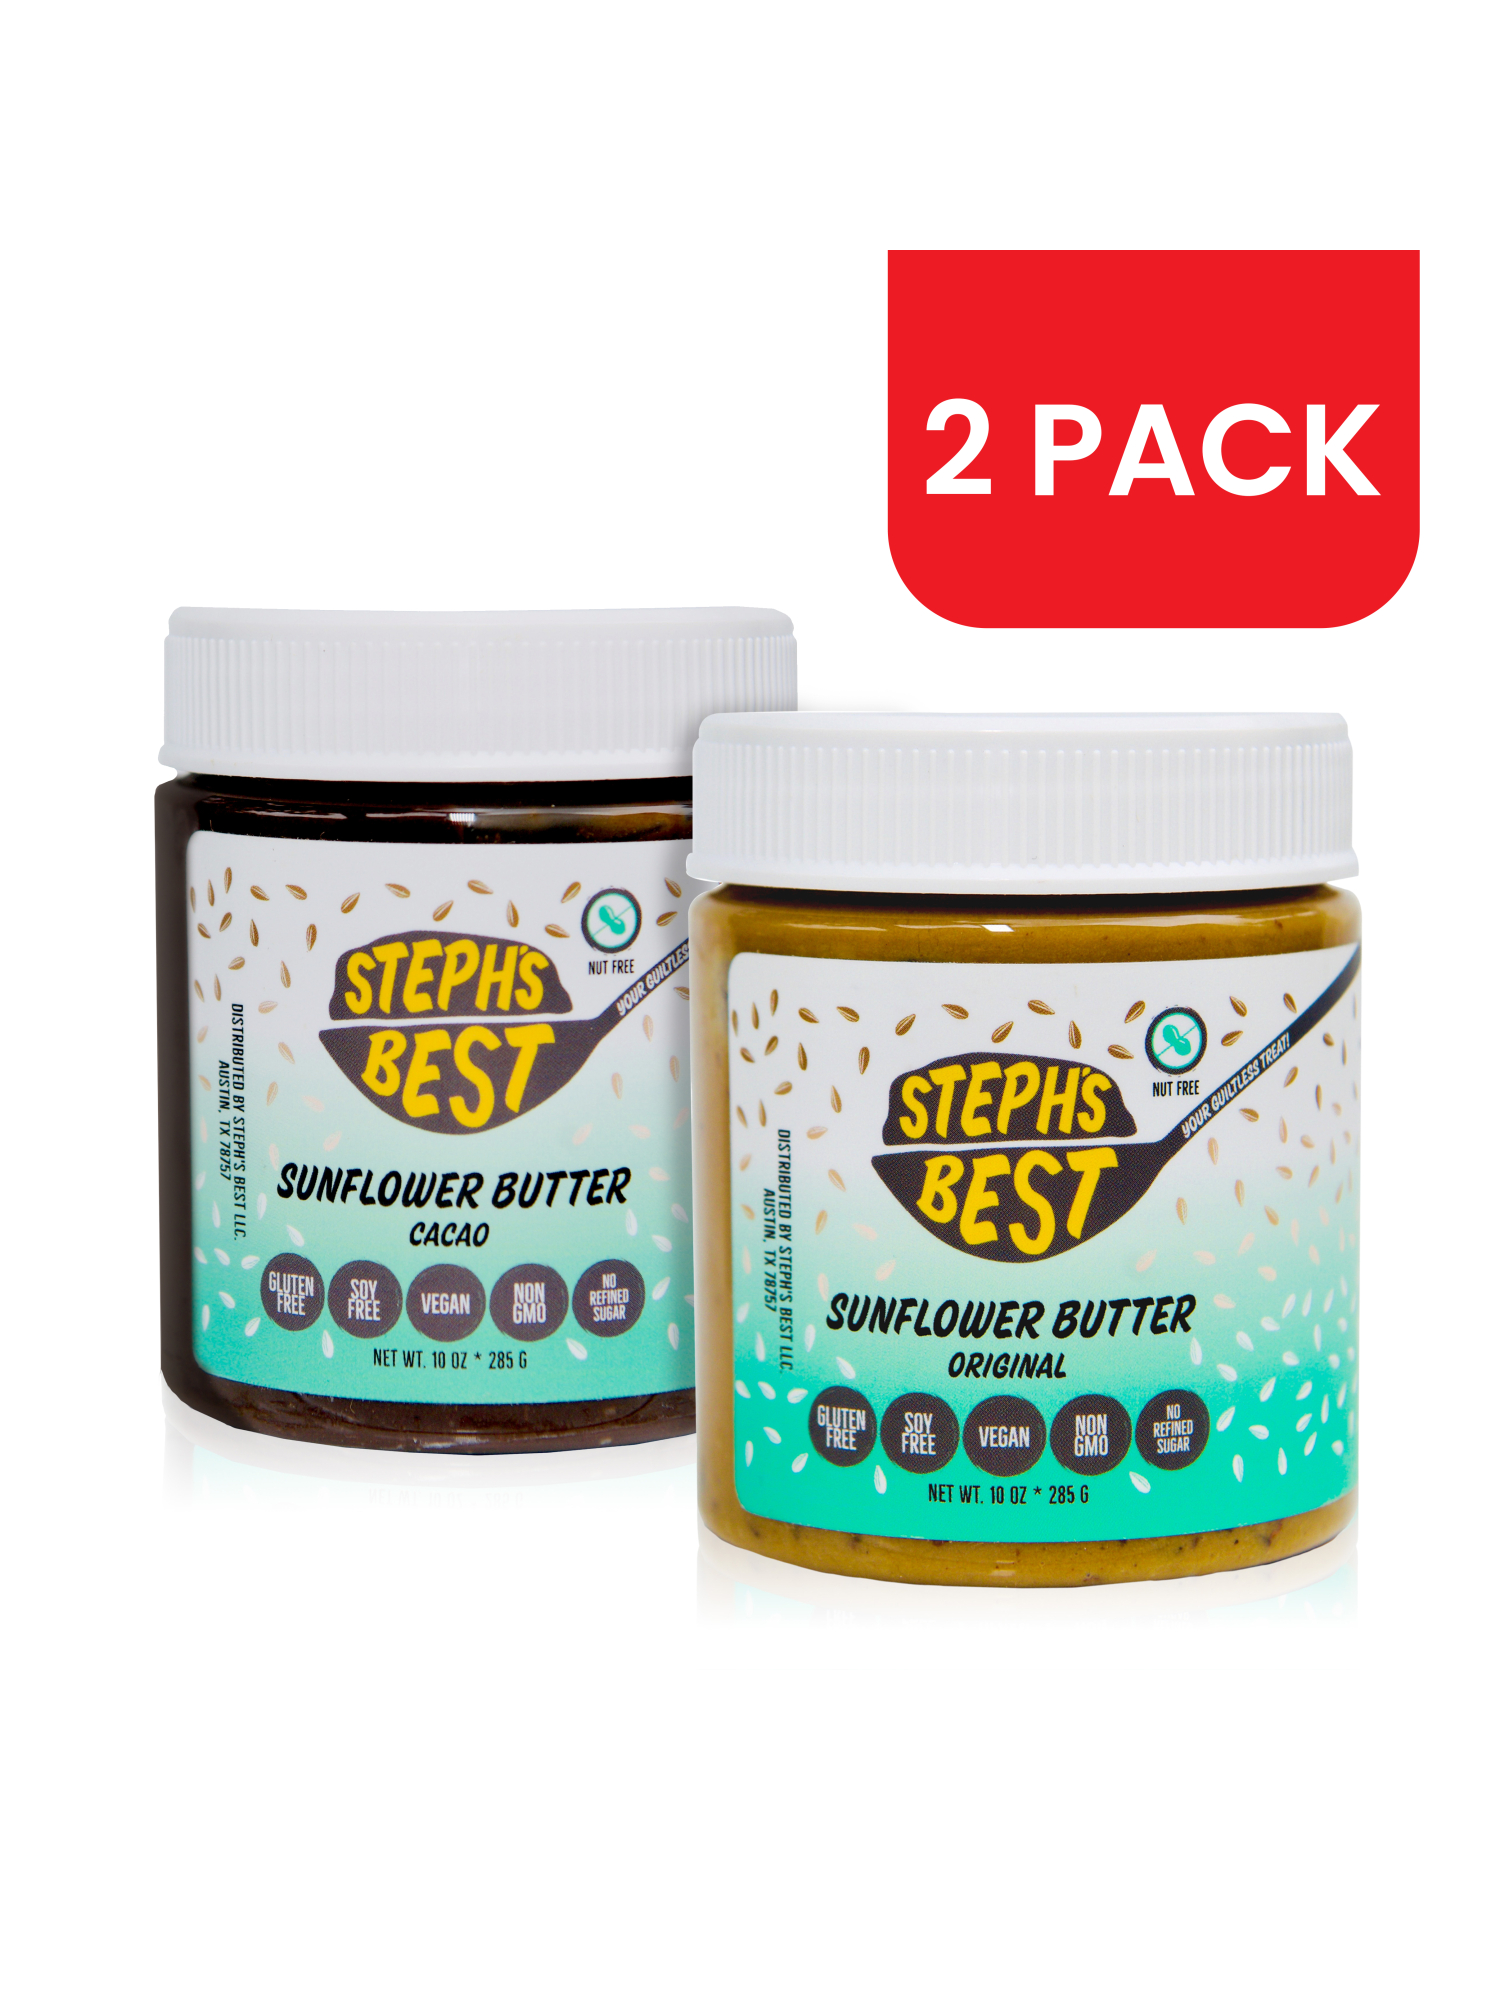 Steph's Best Steph’s Best Cacao Chocolate and Original Flavored Protein Butter, Sunflower Seed Spread, 2 Pack